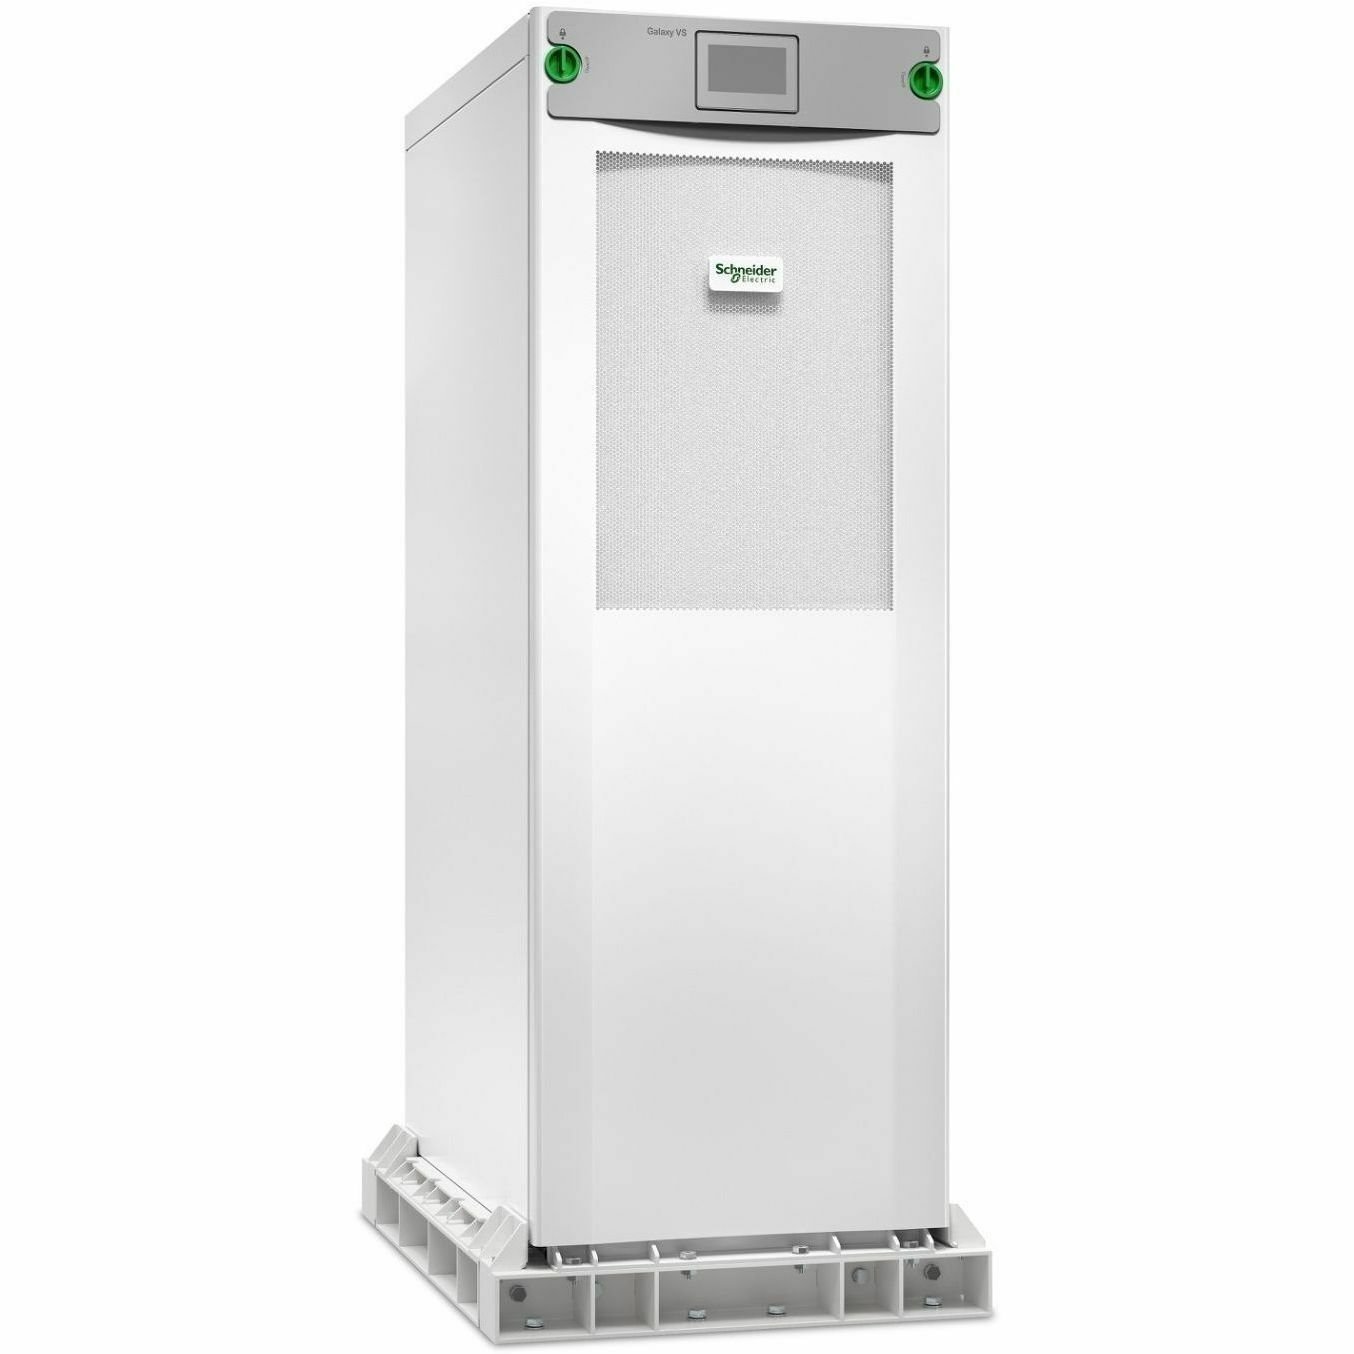 APC by Schneider Electric Galaxy VS Double Conversion Online UPS - 40 kVA/40 kW - Three Phase